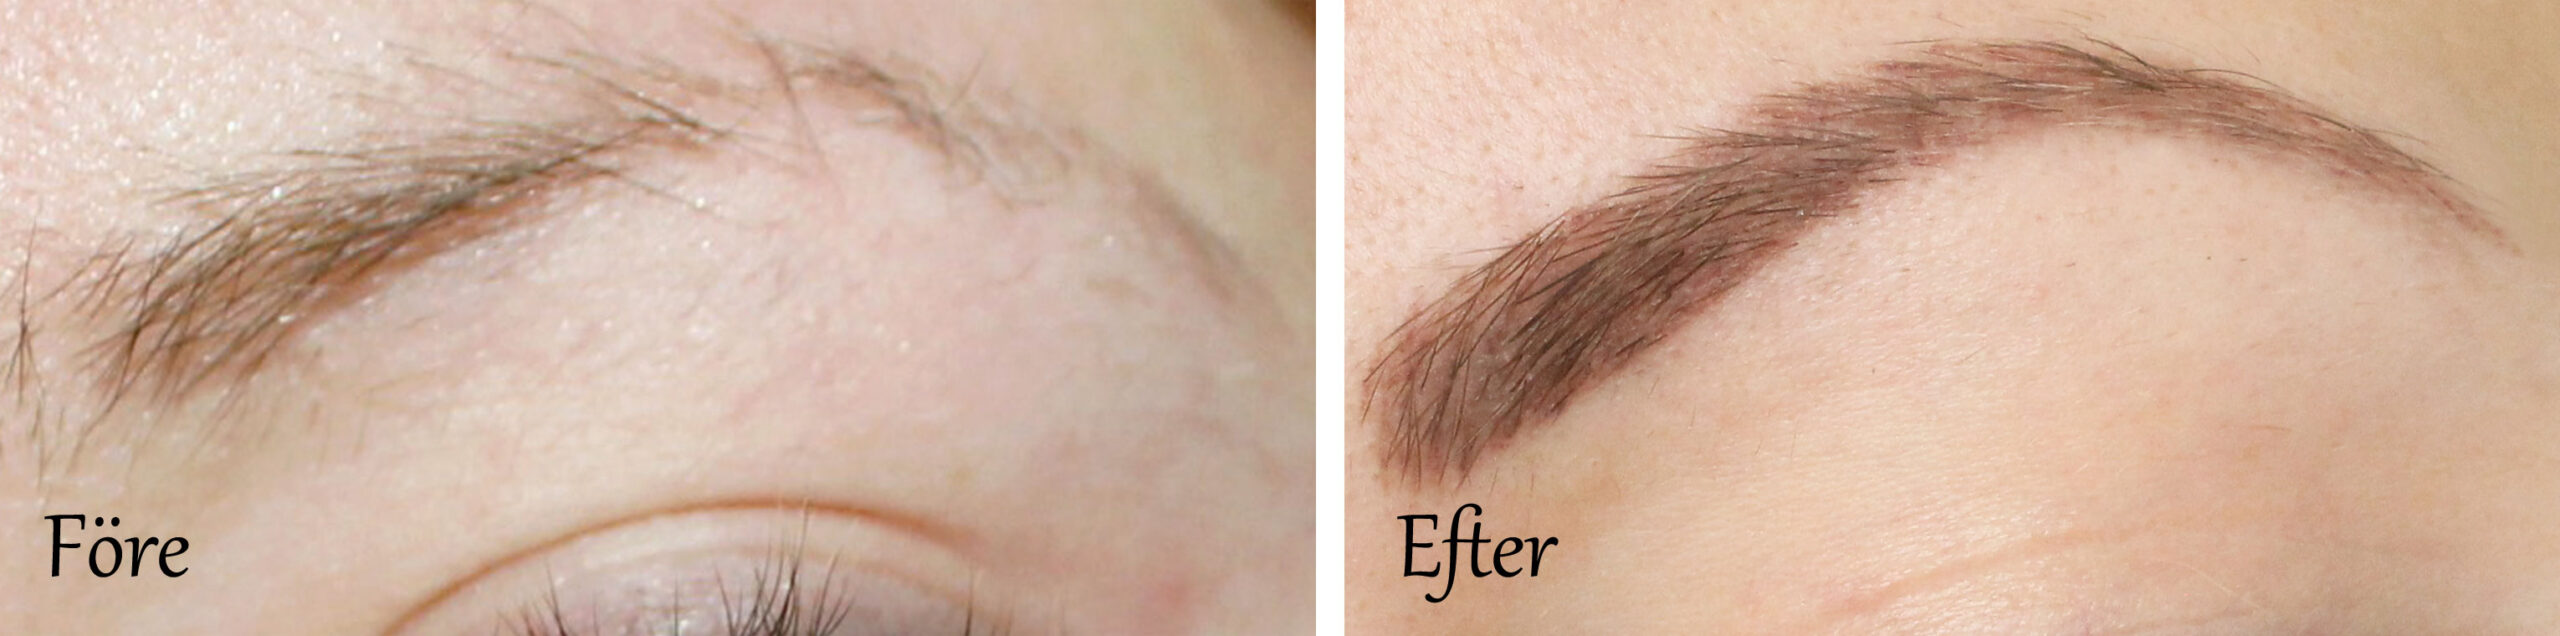 permanent-makuep-eyebrows-before-and-after